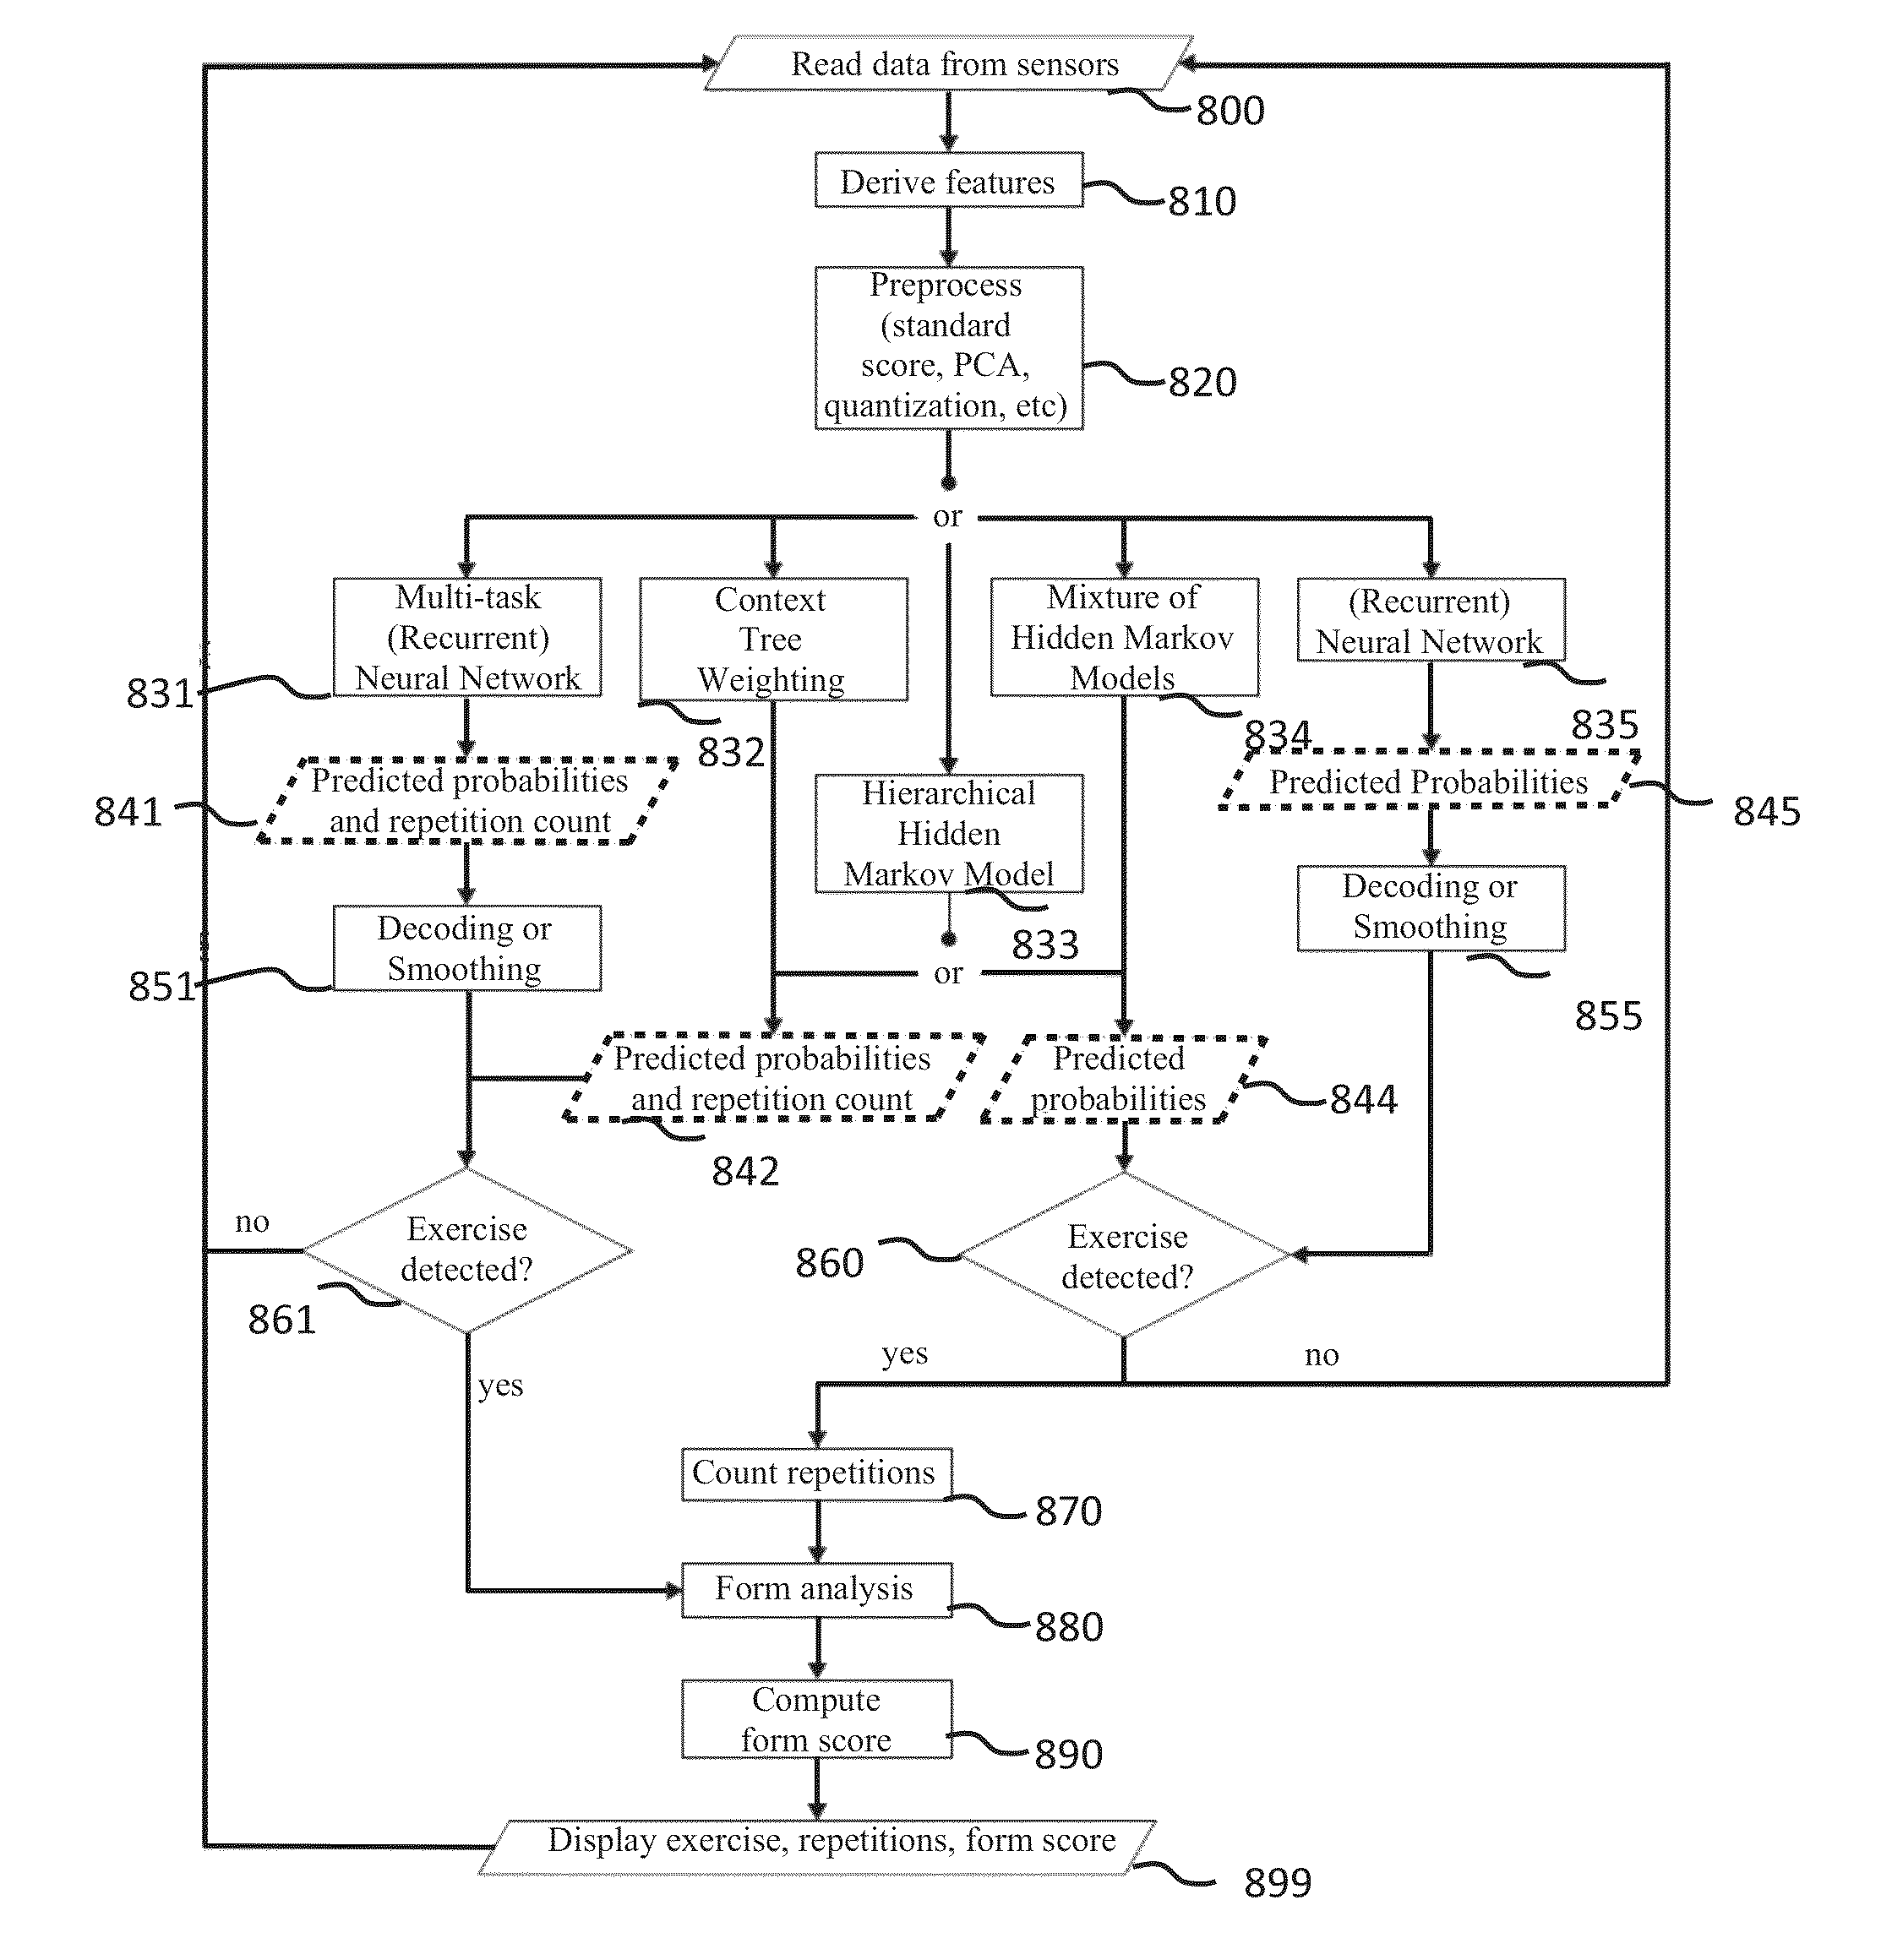 Portable computing device and analyses of personal data captured therefrom